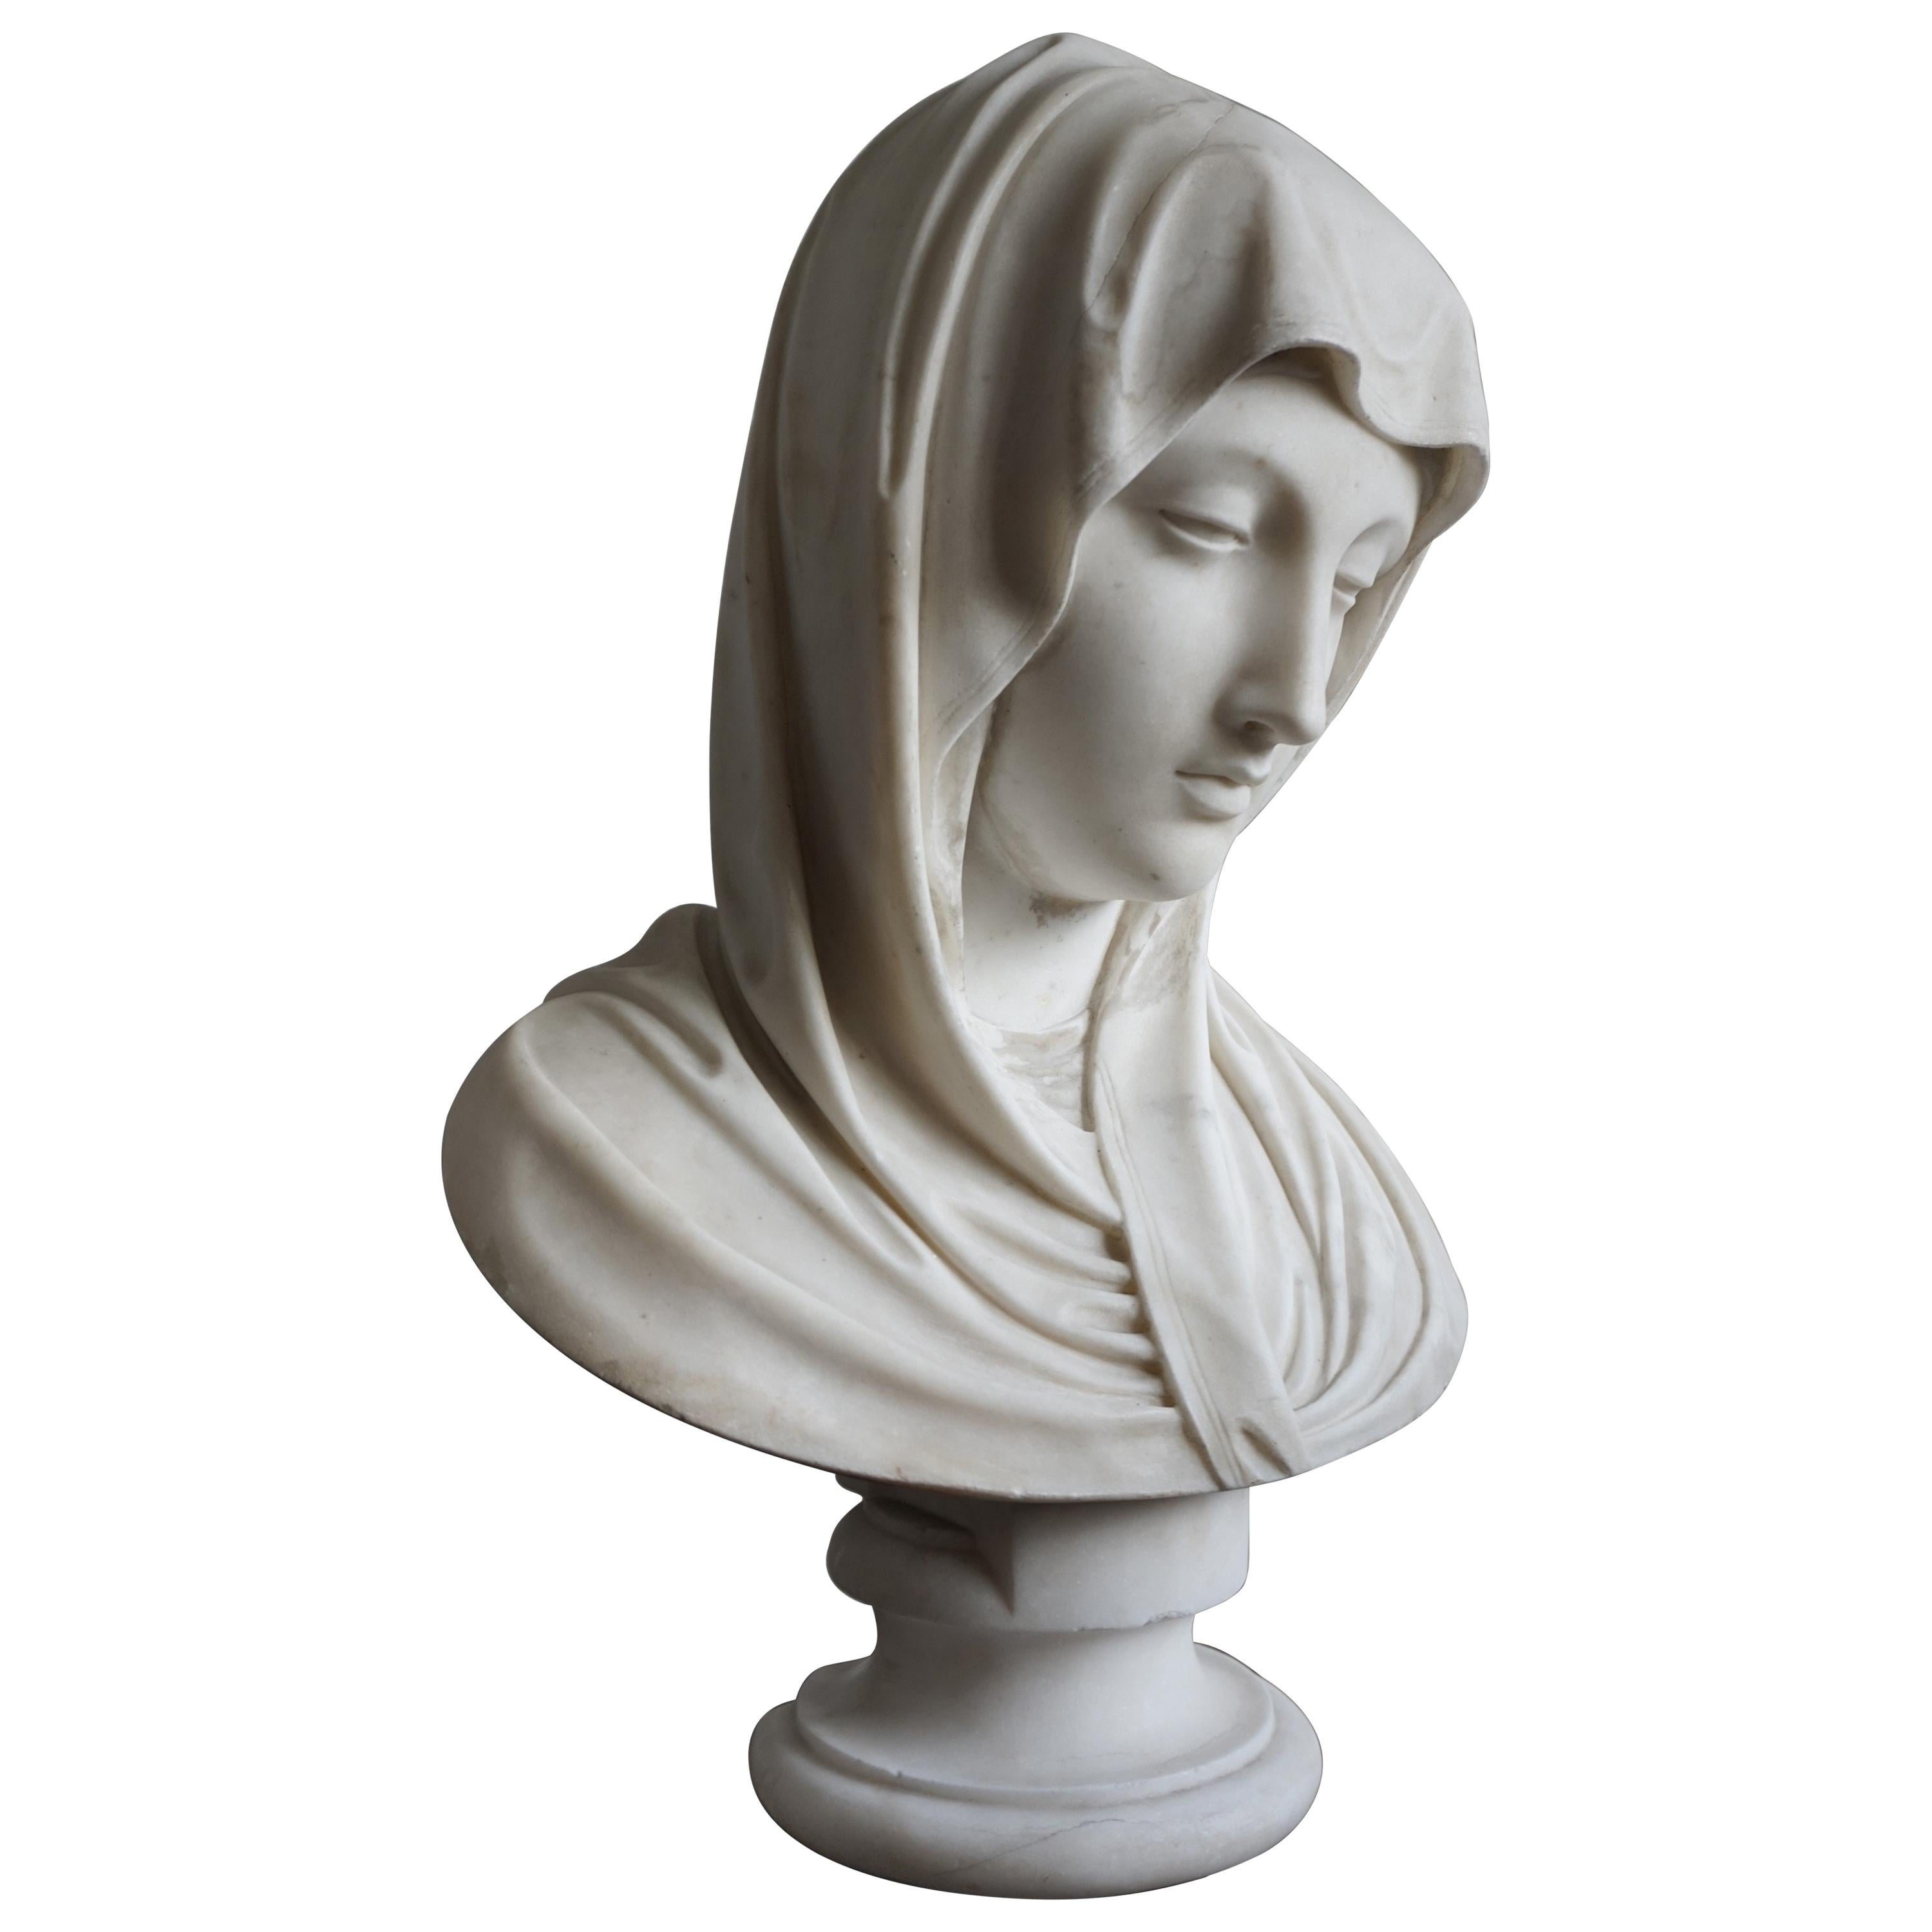 Rare and Hand Carved 19th Century Marble Bust Sculpture of a Serene Virgin Mary